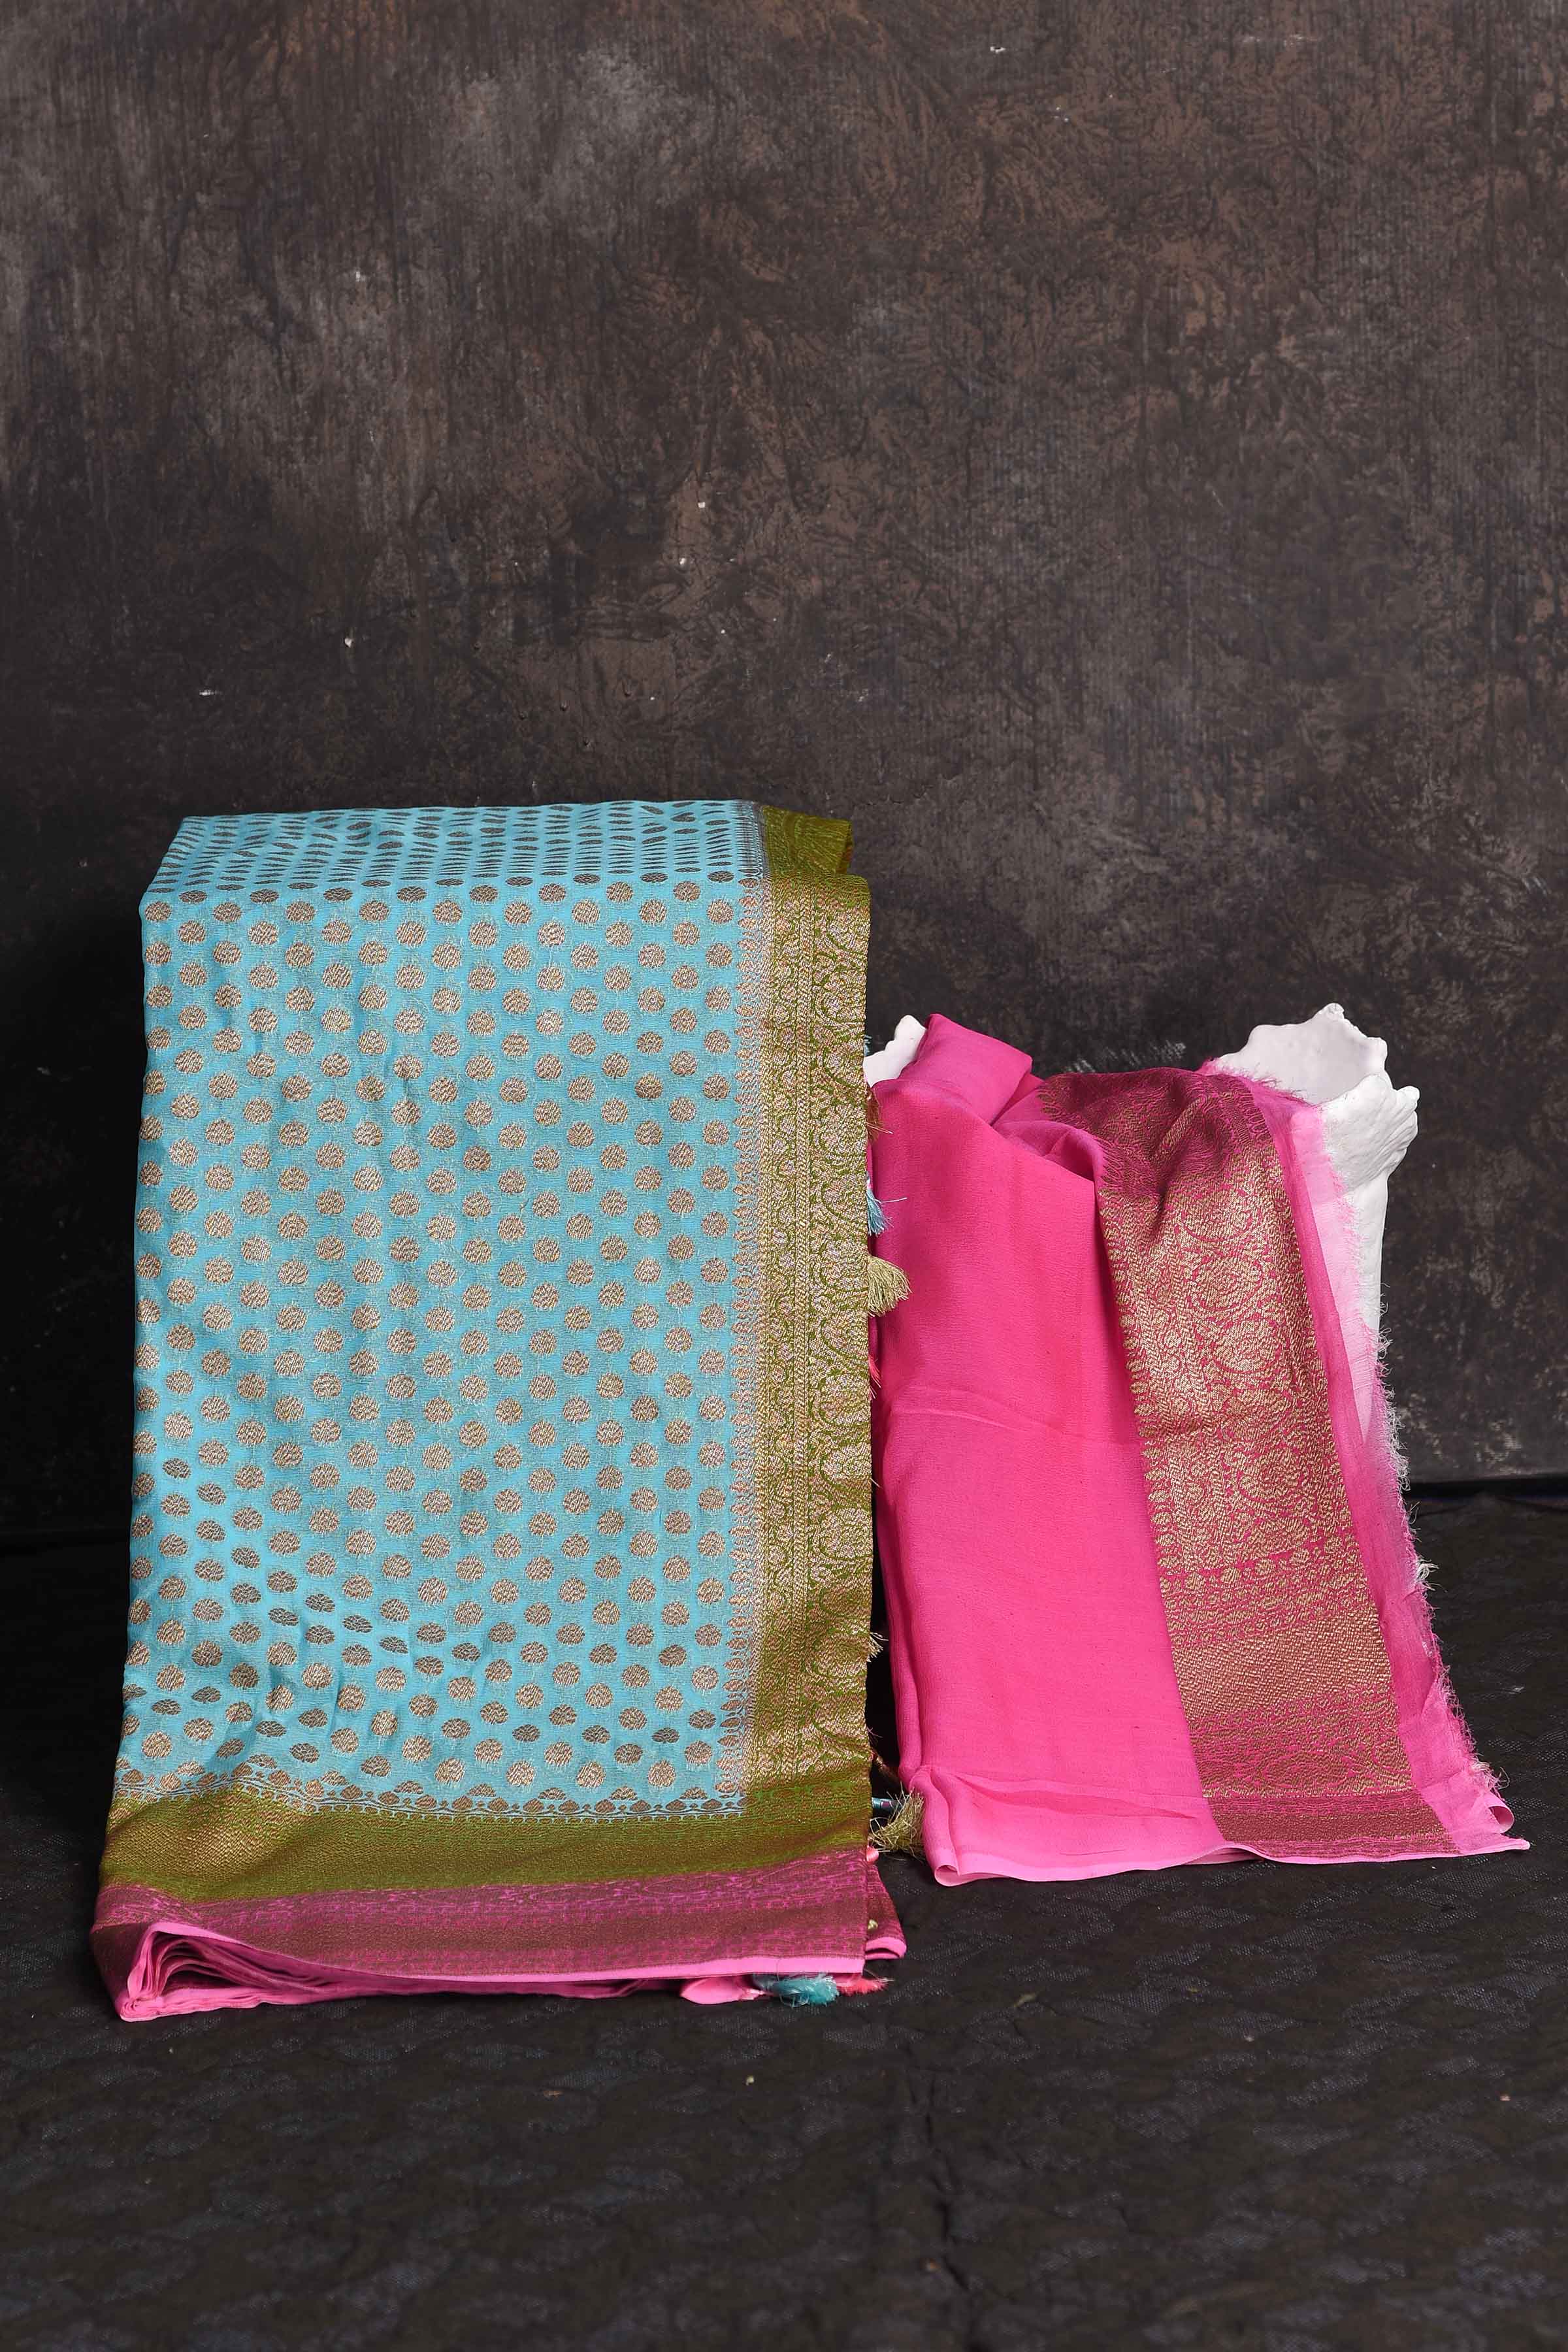 Buy beautiful sky blue georgette Banarasi saree online in USA with pink and green border, Be a vision of ethnic elegance on festive occasions in beautiful designer sarees, silk sarees, handloom sarees, Kanchipuram silk sarees, embroidered sarees from Pure Elegance Indian saree store in USA. -blouse